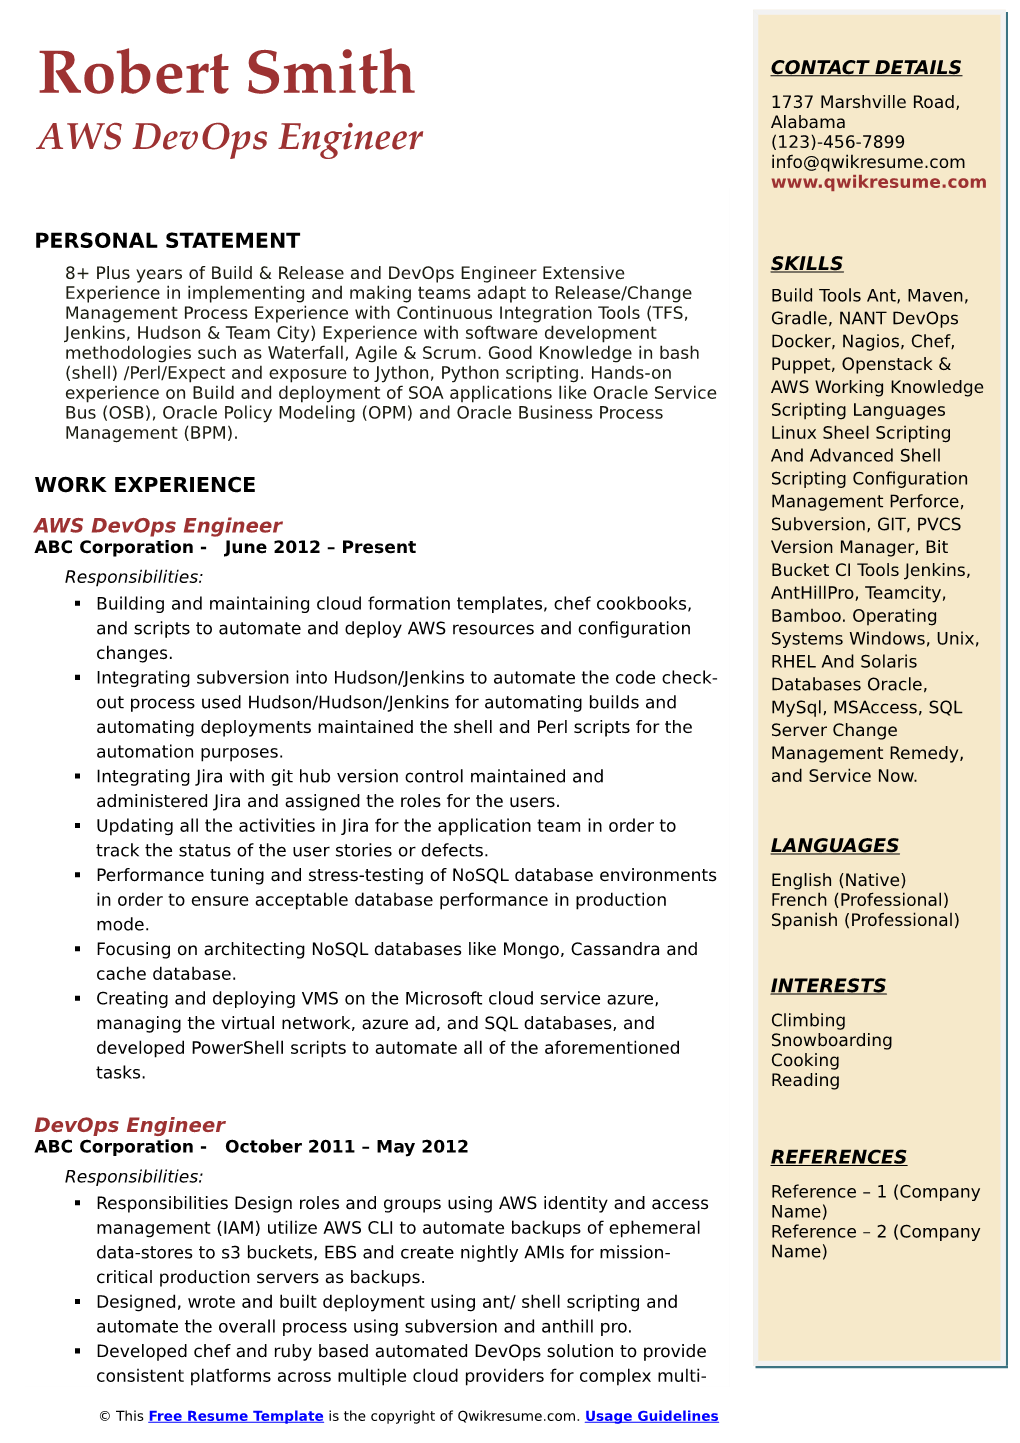 Resume Template Is the Copyright of Qwikresume.Com